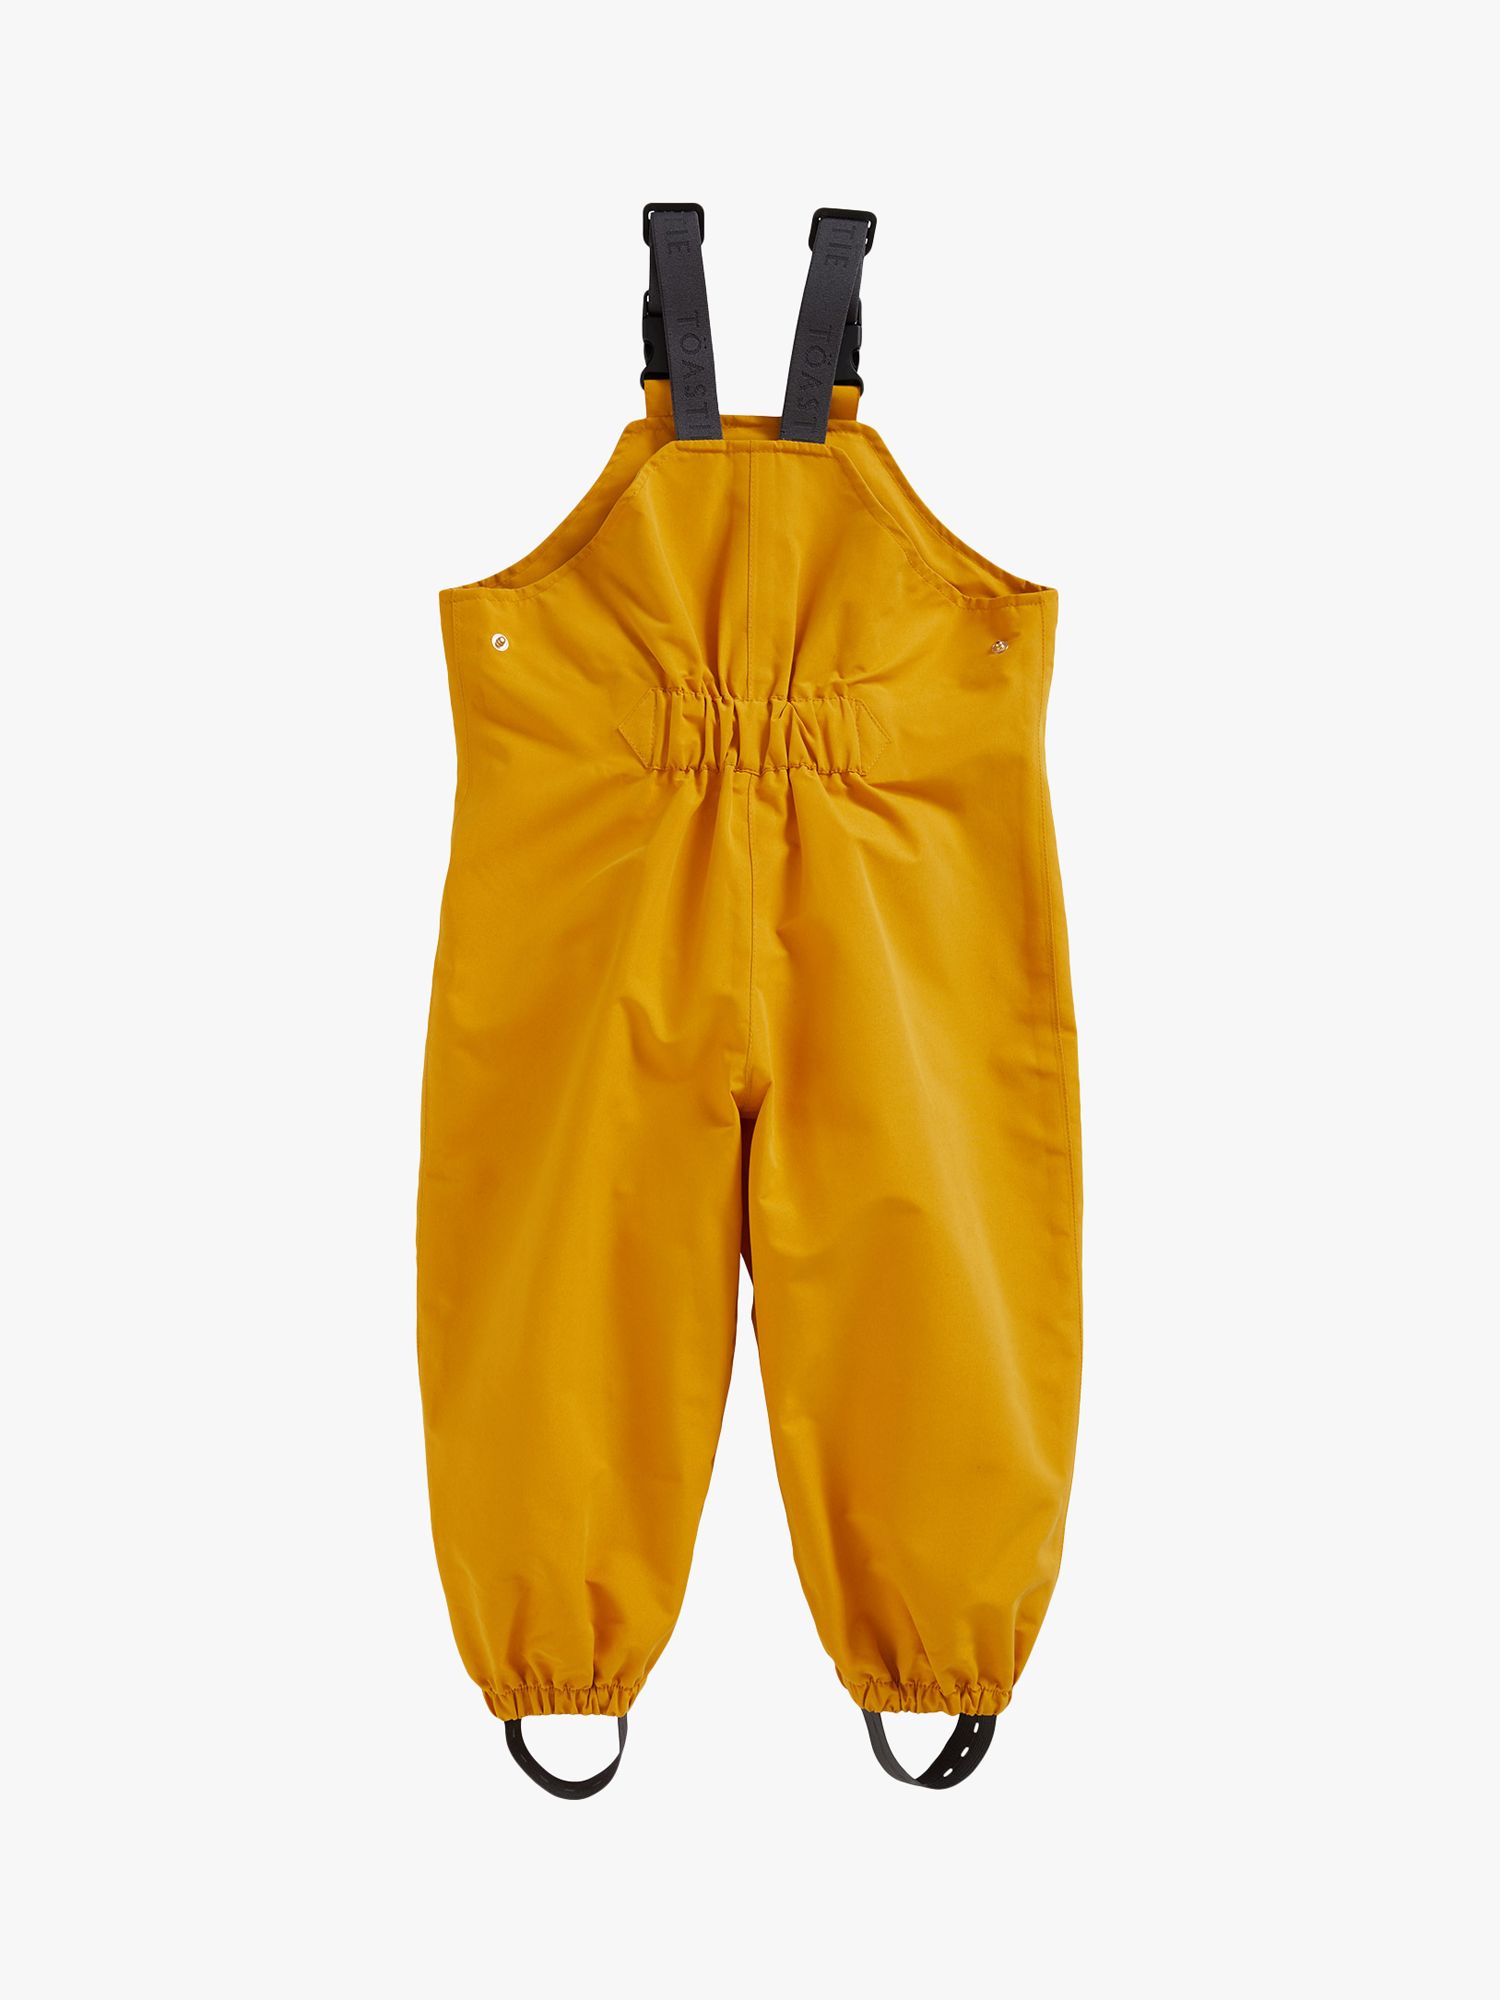 Trotters Kids' Waterproof Dungarees by Toastie, Yellow, XS